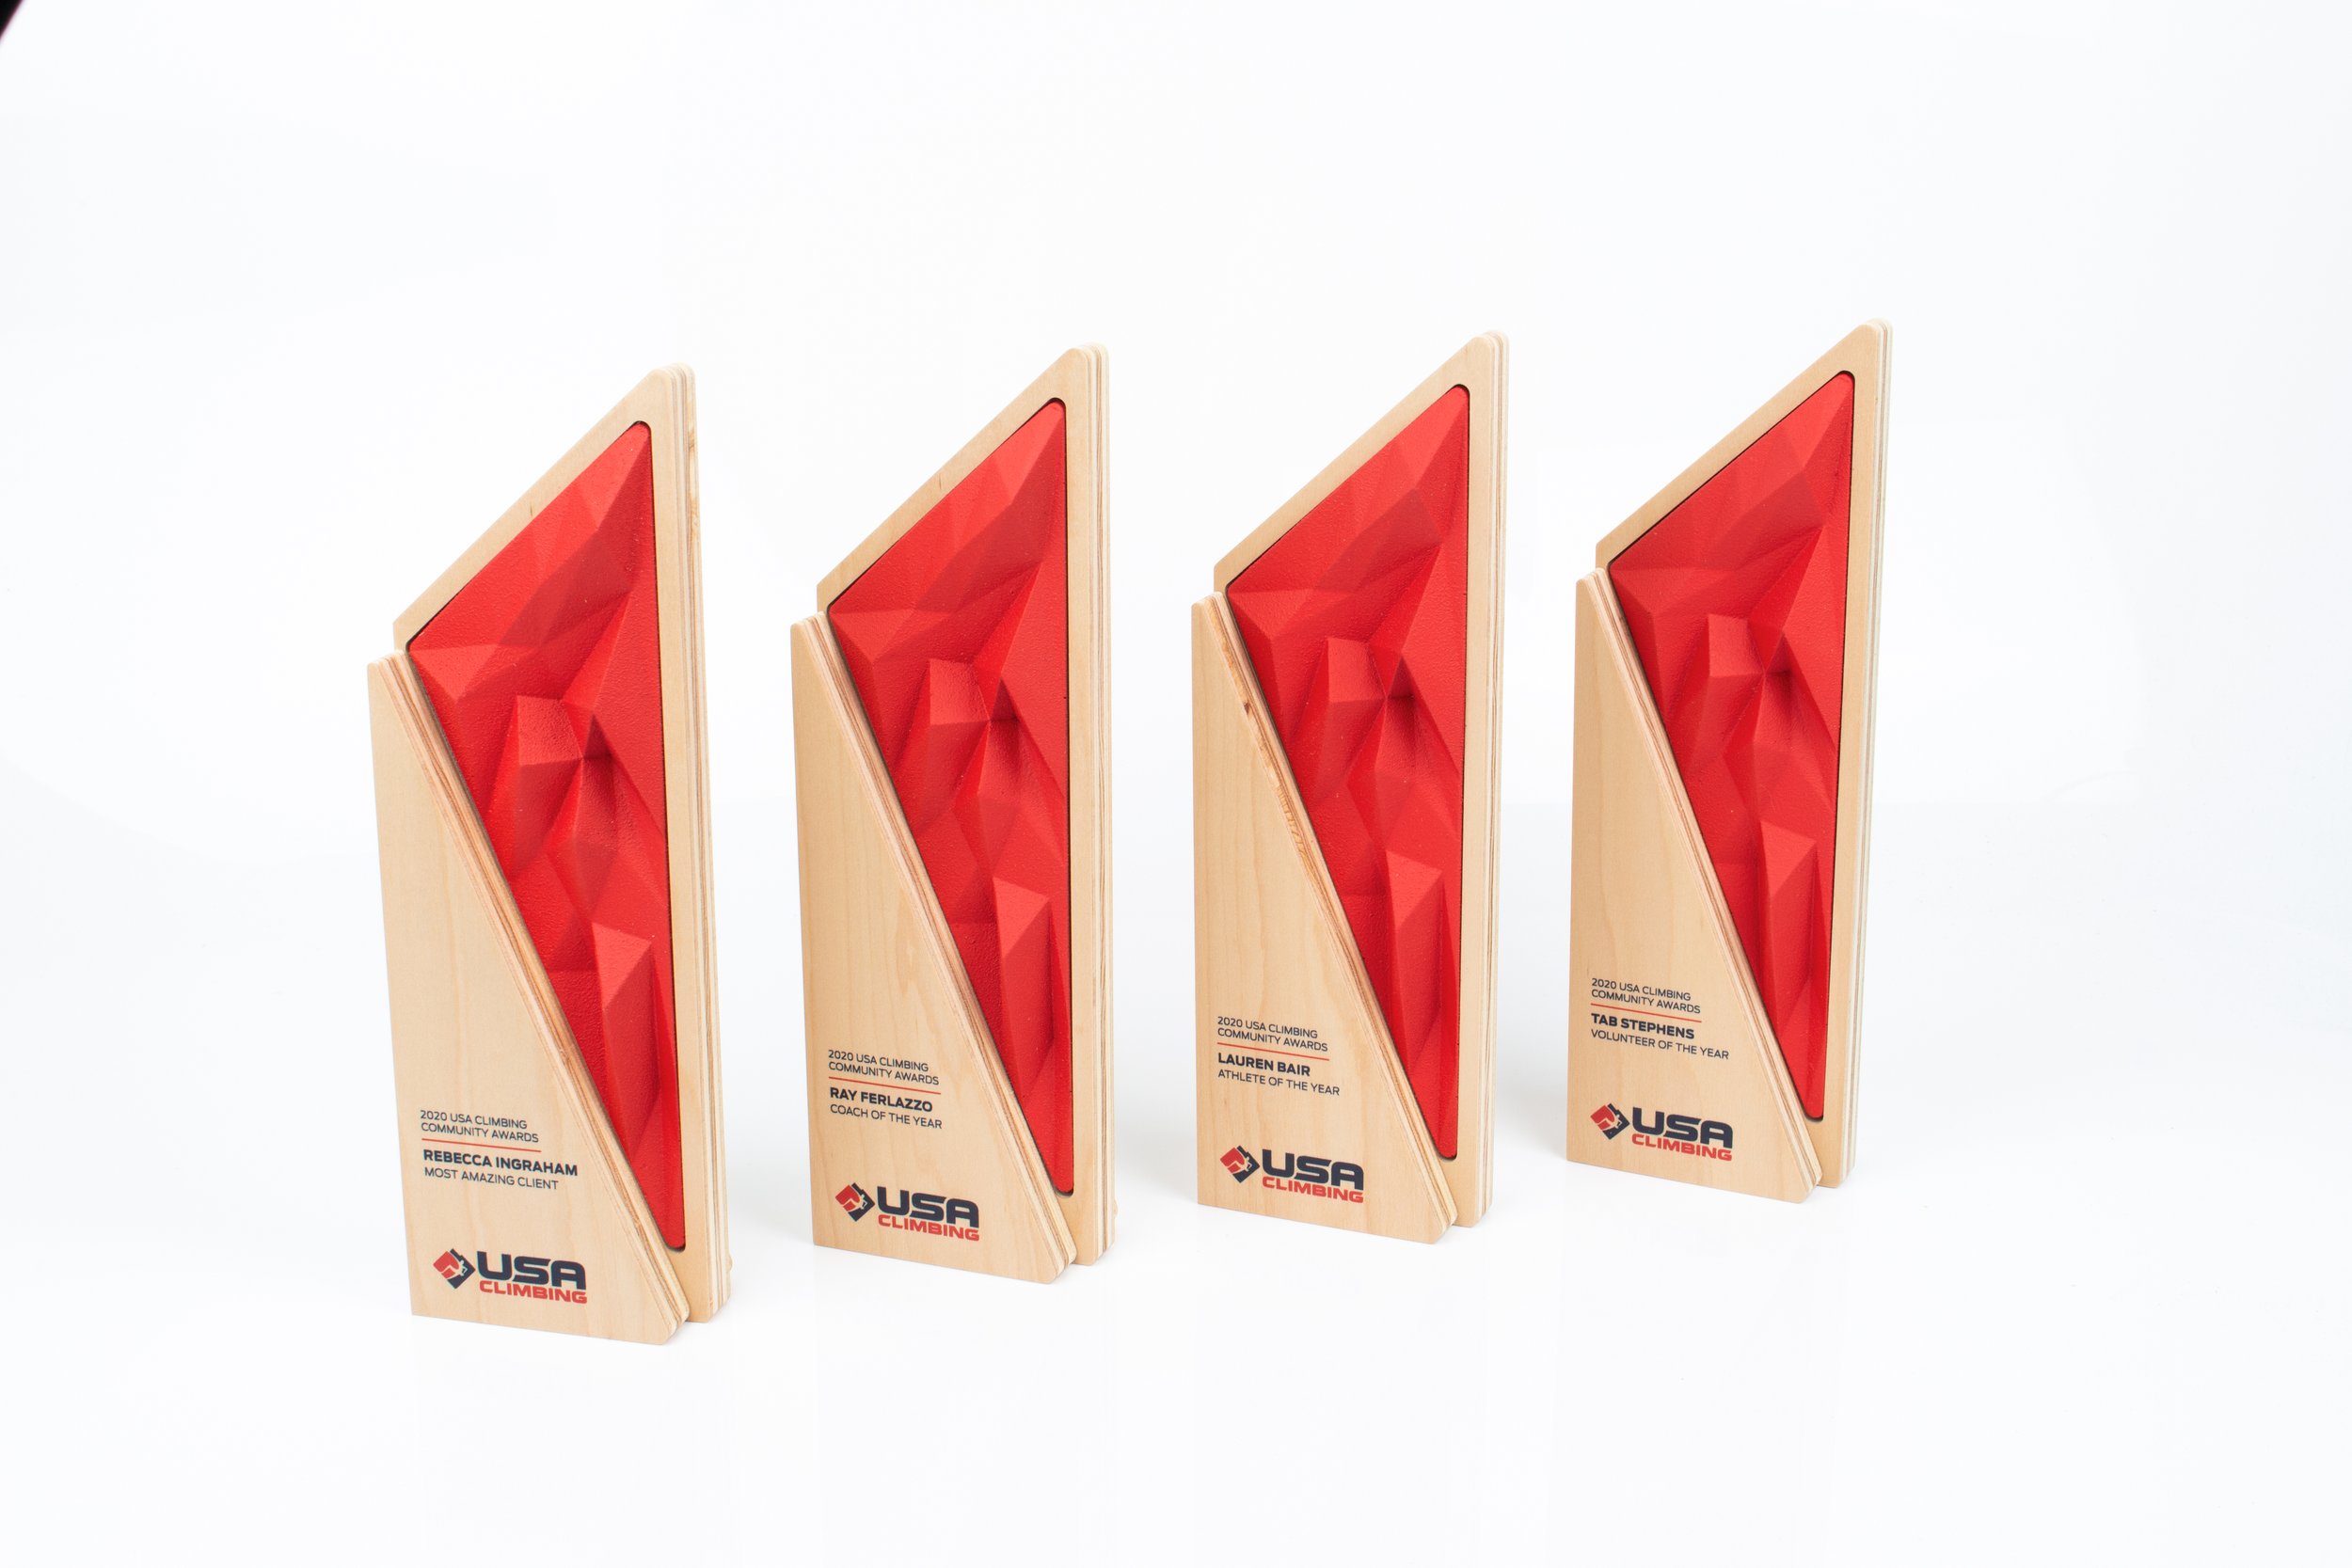 usa climbing bespoke trophies plywwod and resin